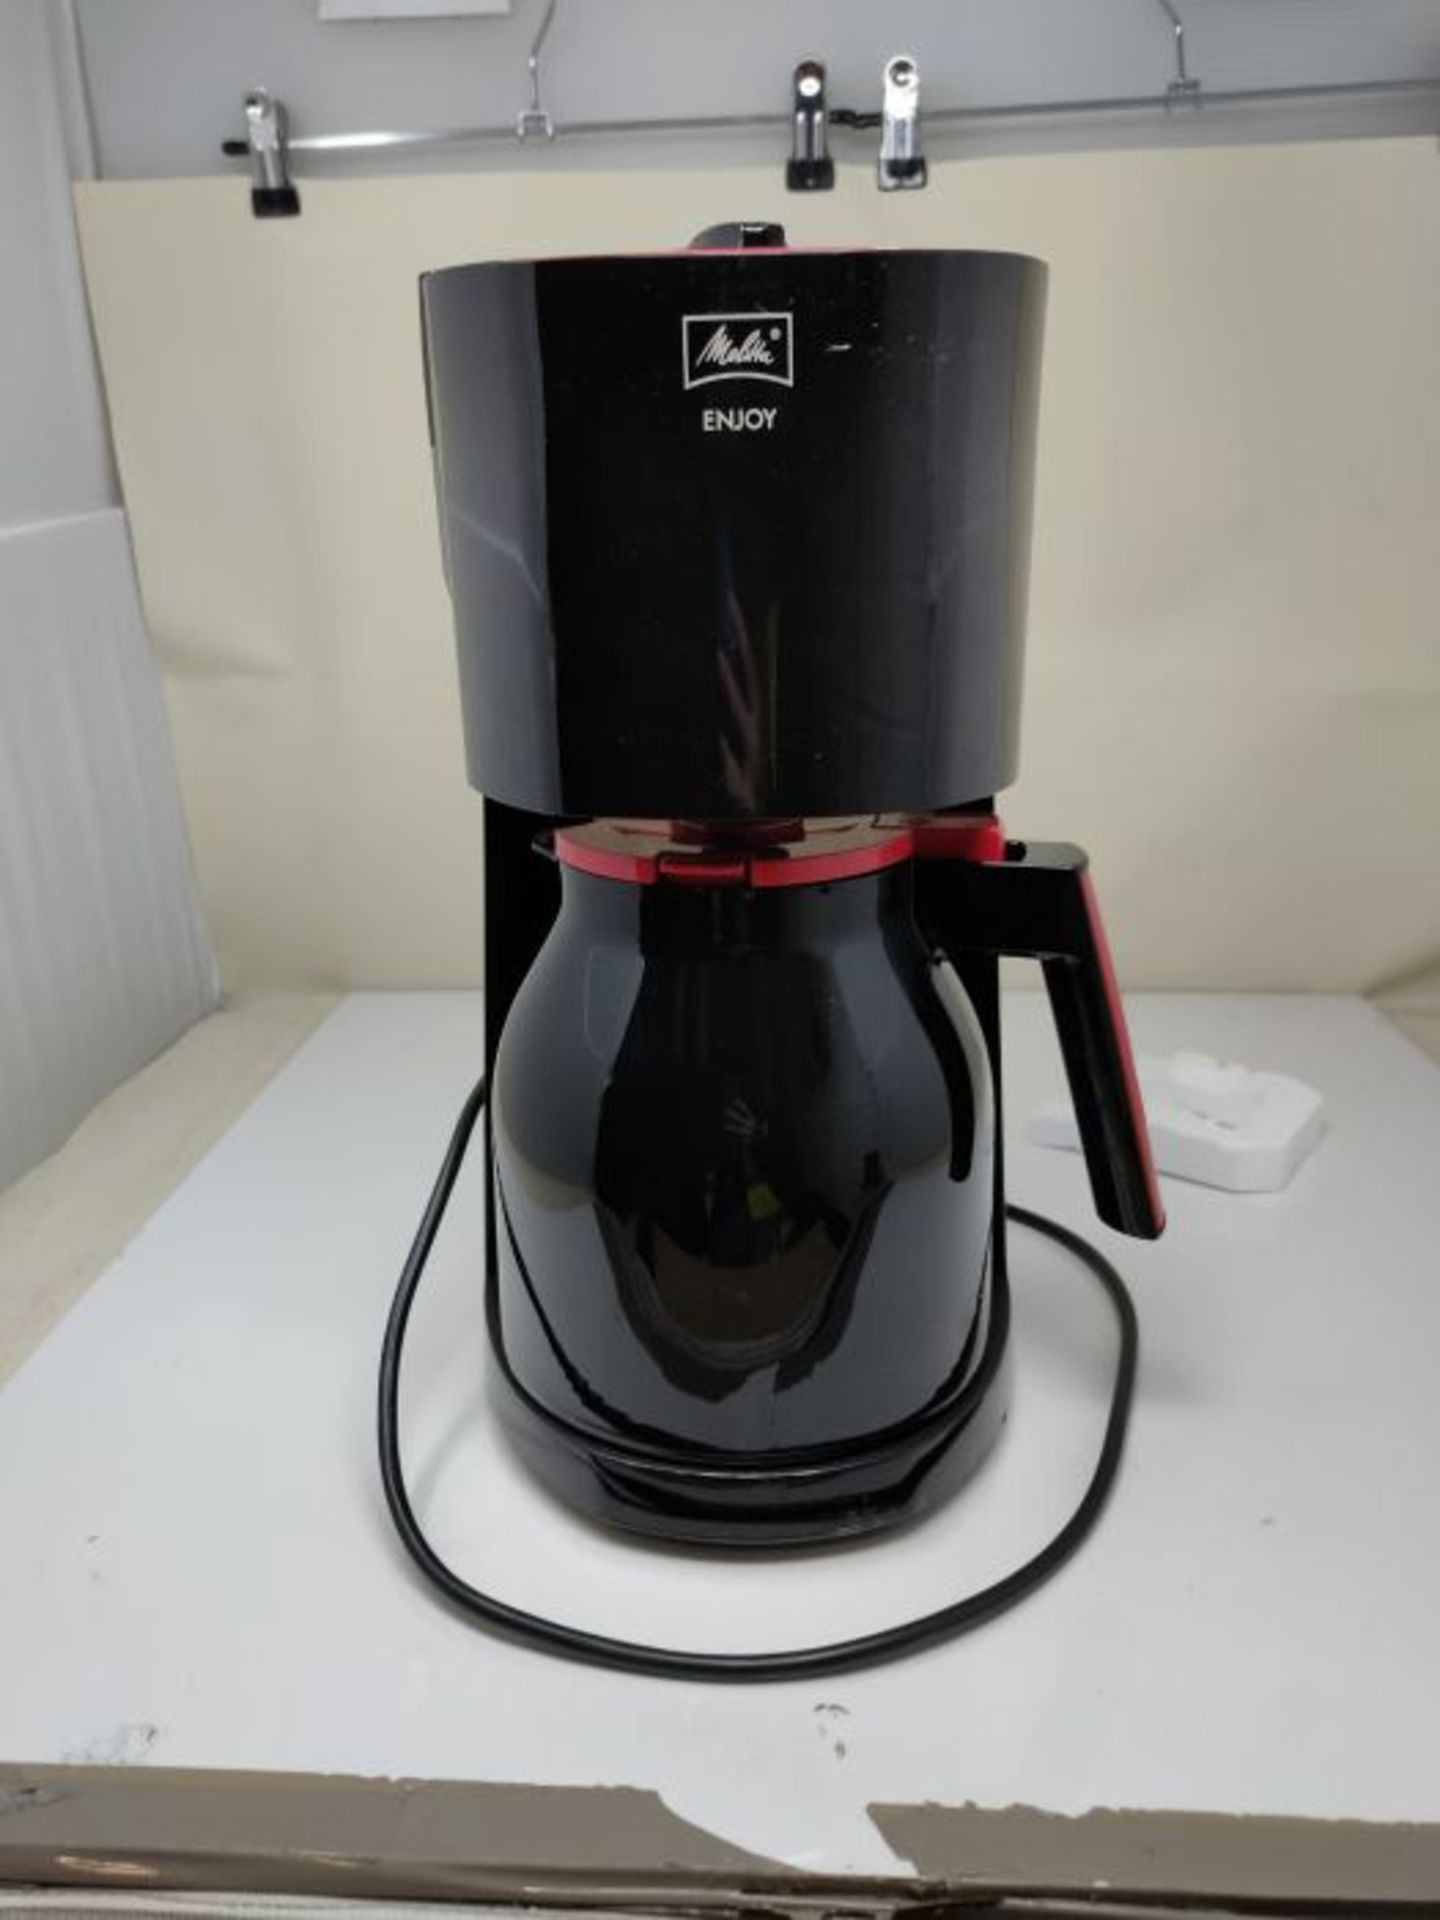 Melitta 1017-10, Filter Coffee Maker with Isothermal Jug, Aroma Selector, Black/Red - Image 3 of 3